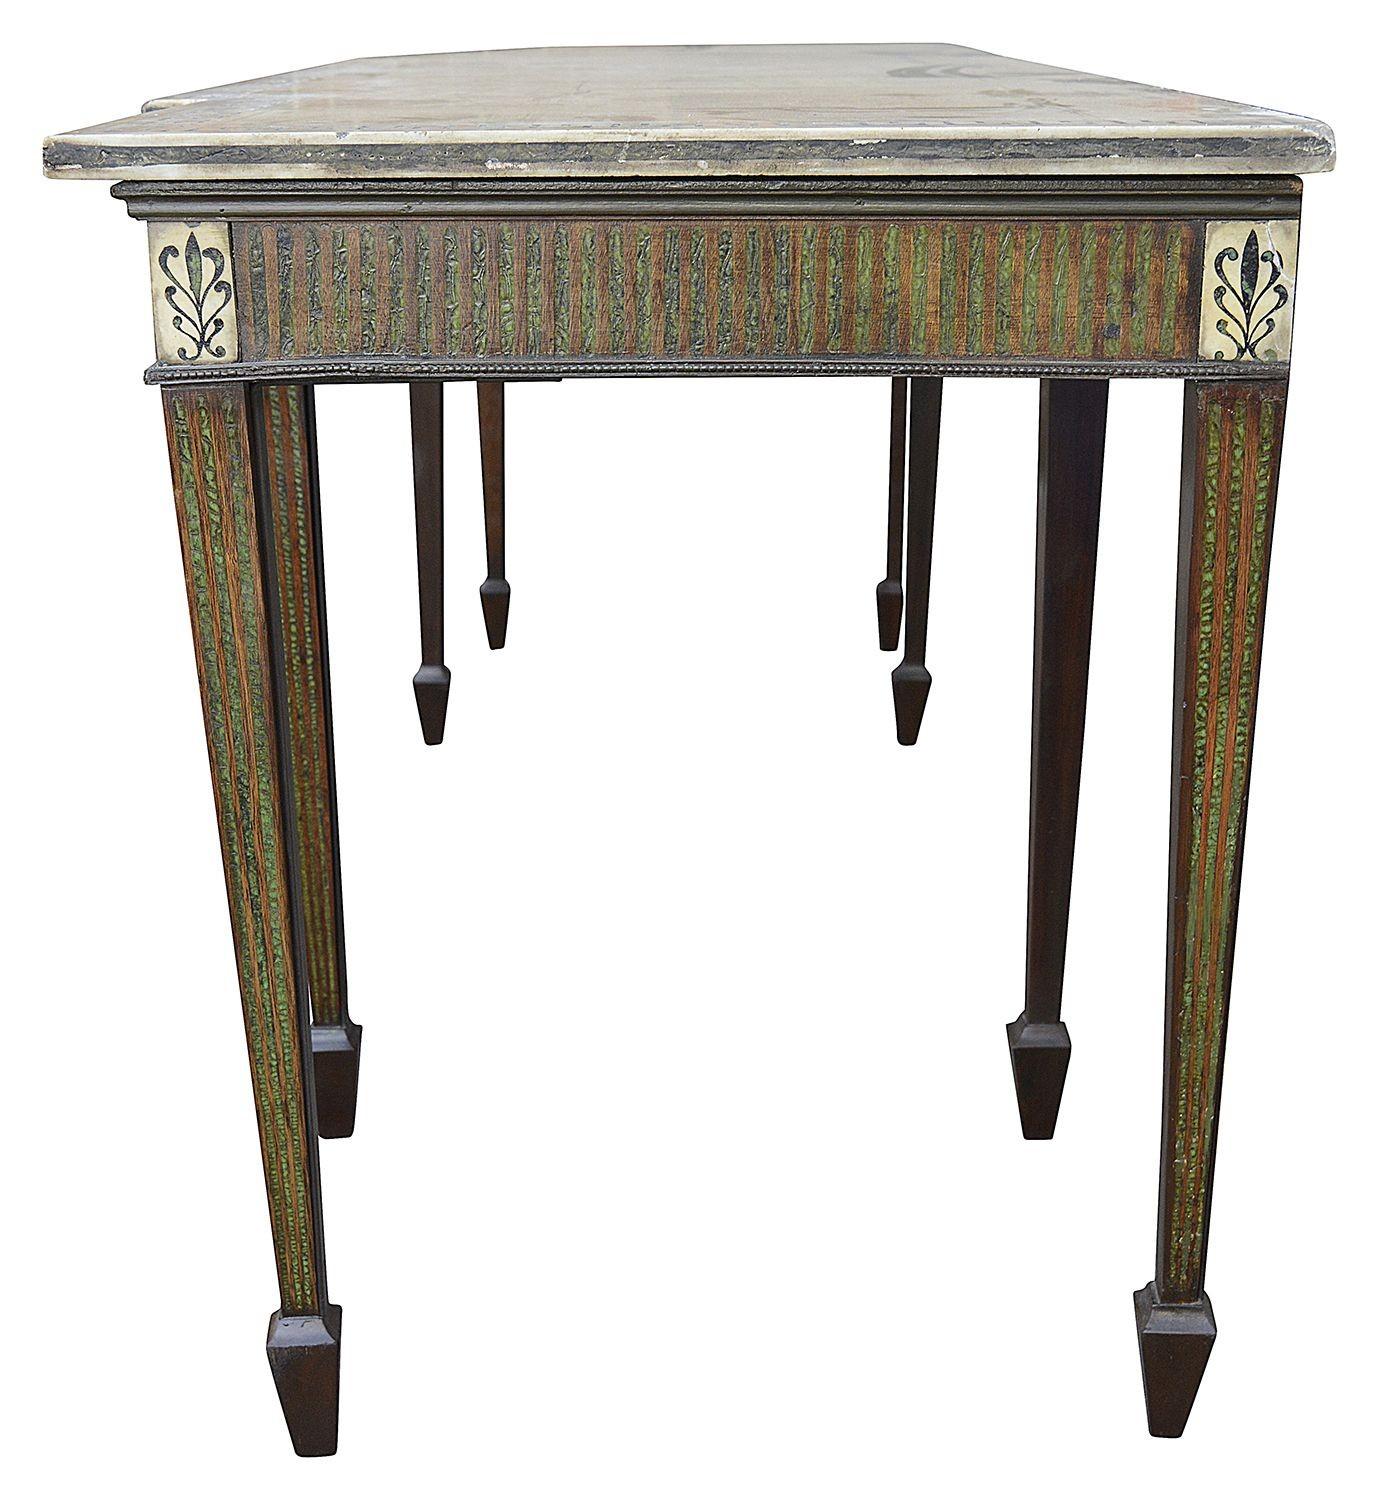 An impressive 19th century classical influenced marble topped console table, having inlaid Greek Key pattern to the break fronted top. Inlaid faux Malachite fluting to the freeze, an urn to the central tablet and raised on square tapering inlaid